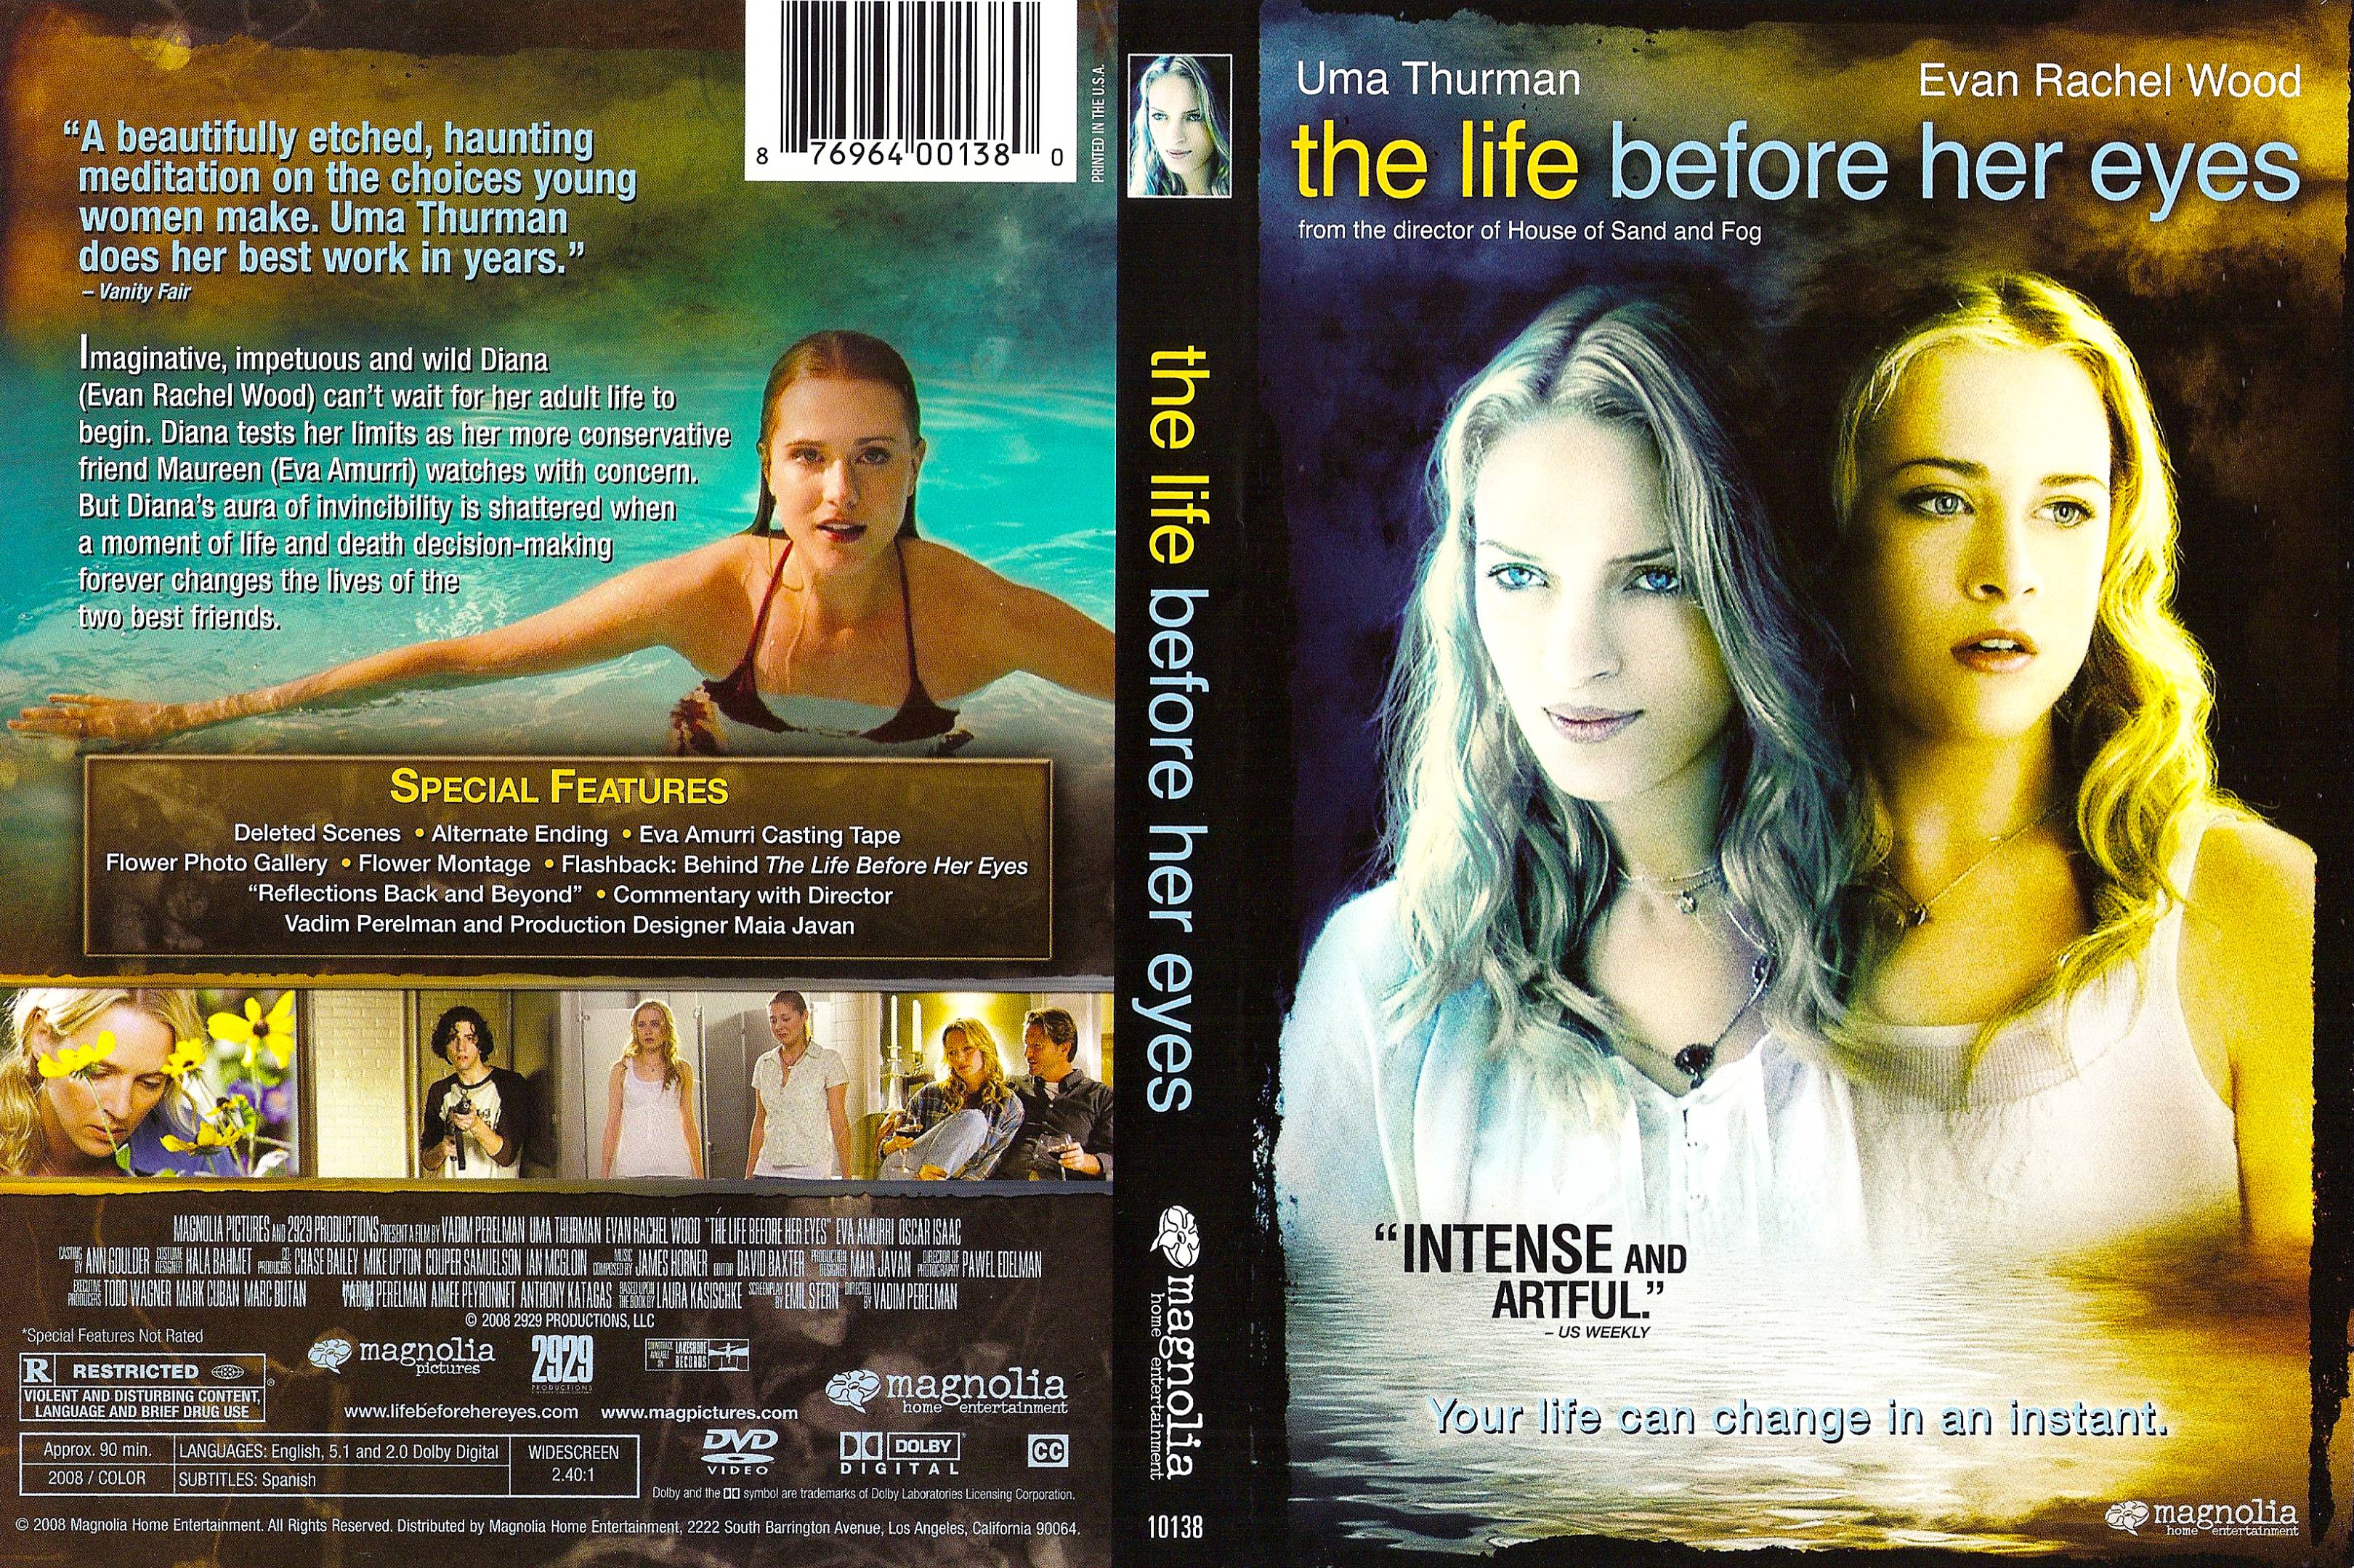 Before we life. The Life before her Eyes. The Life before her Eyes DVD Cover. Life before. Морин ЭВА.